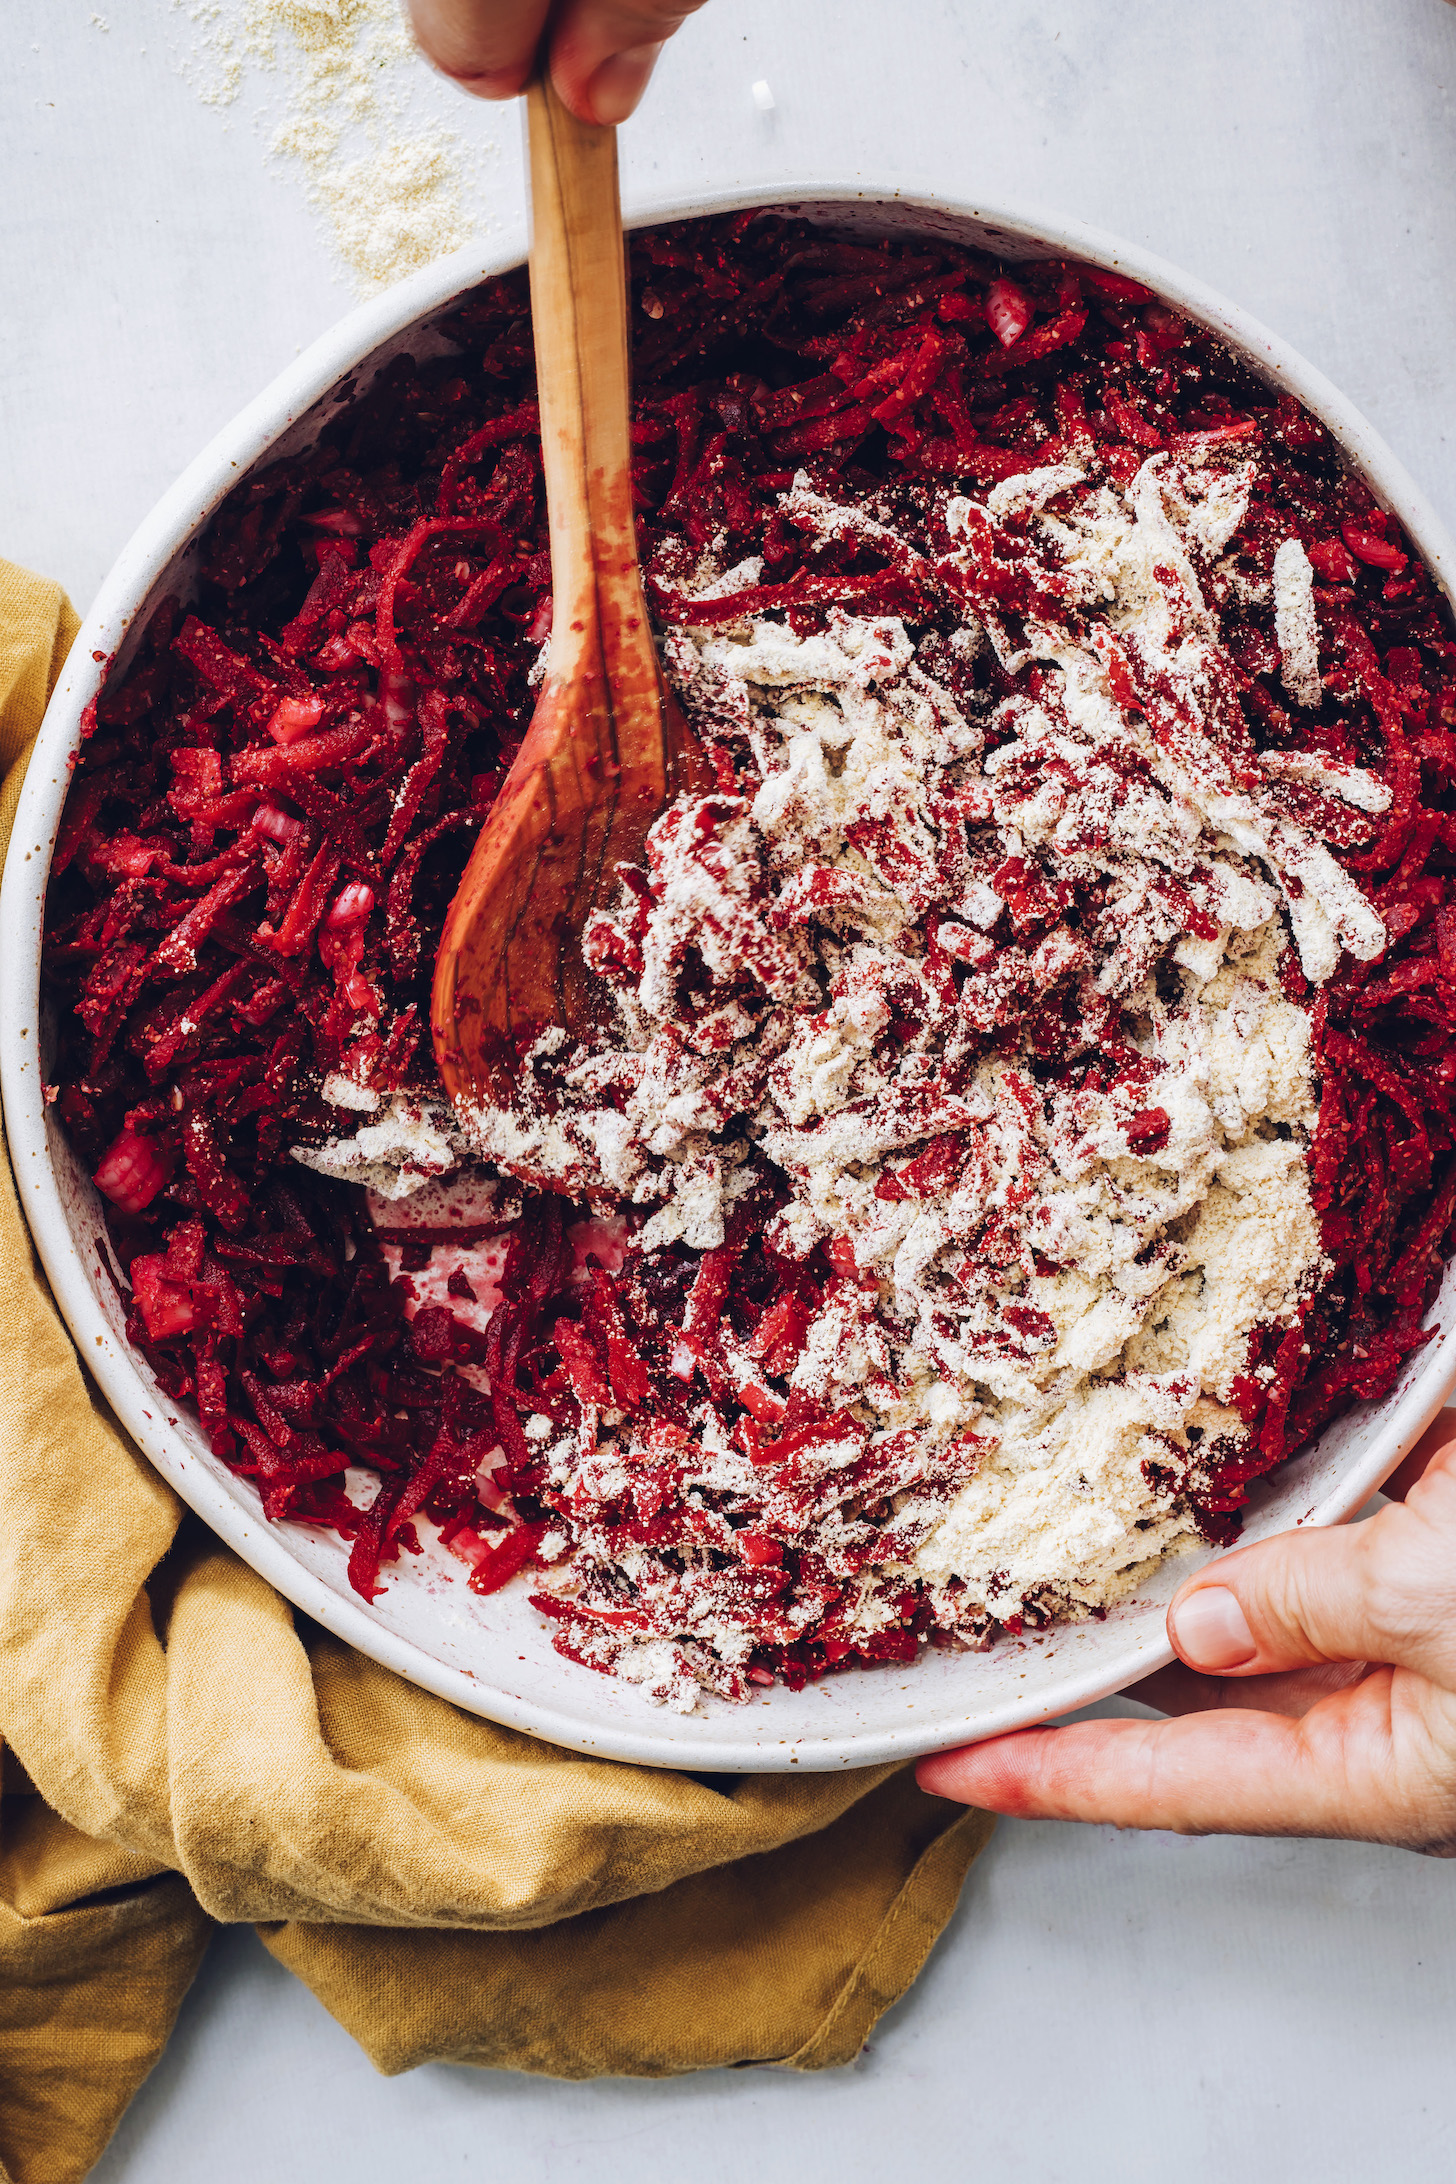 Stirring chickpea flour with shredded beets